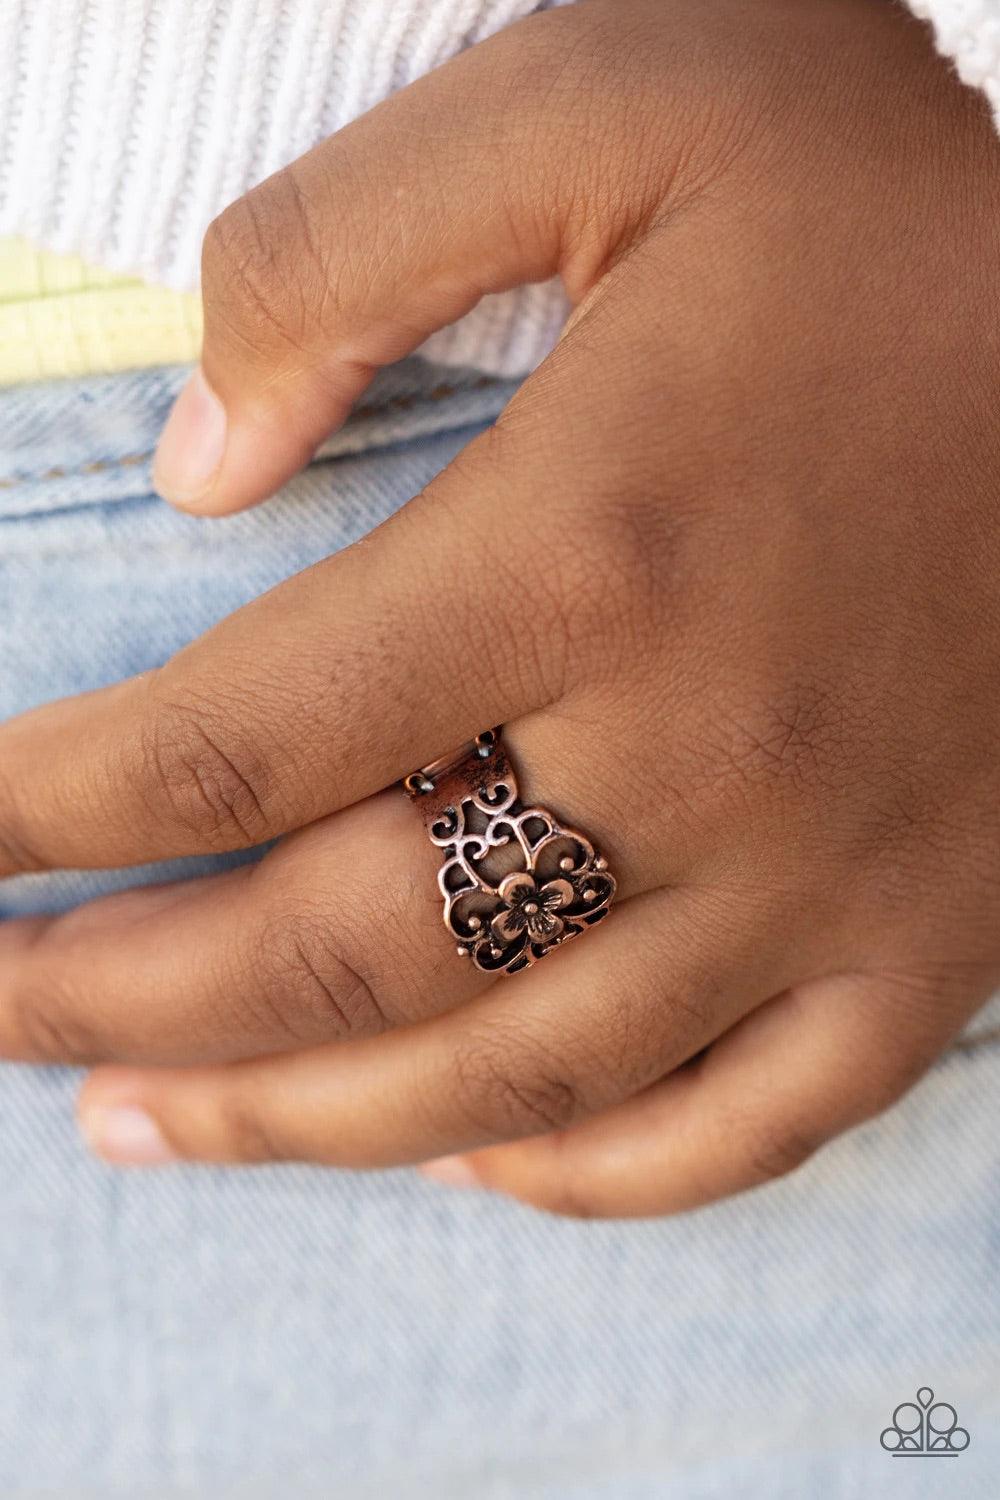 Paparazzi Accessories Fanciful Flower Gardens - Copper Glistening copper filigree blooms from a shimmery floral center, creating a whimsical band across the finger. Features a stretchy band for a flexible fit. Sold as one individual r Jewelry